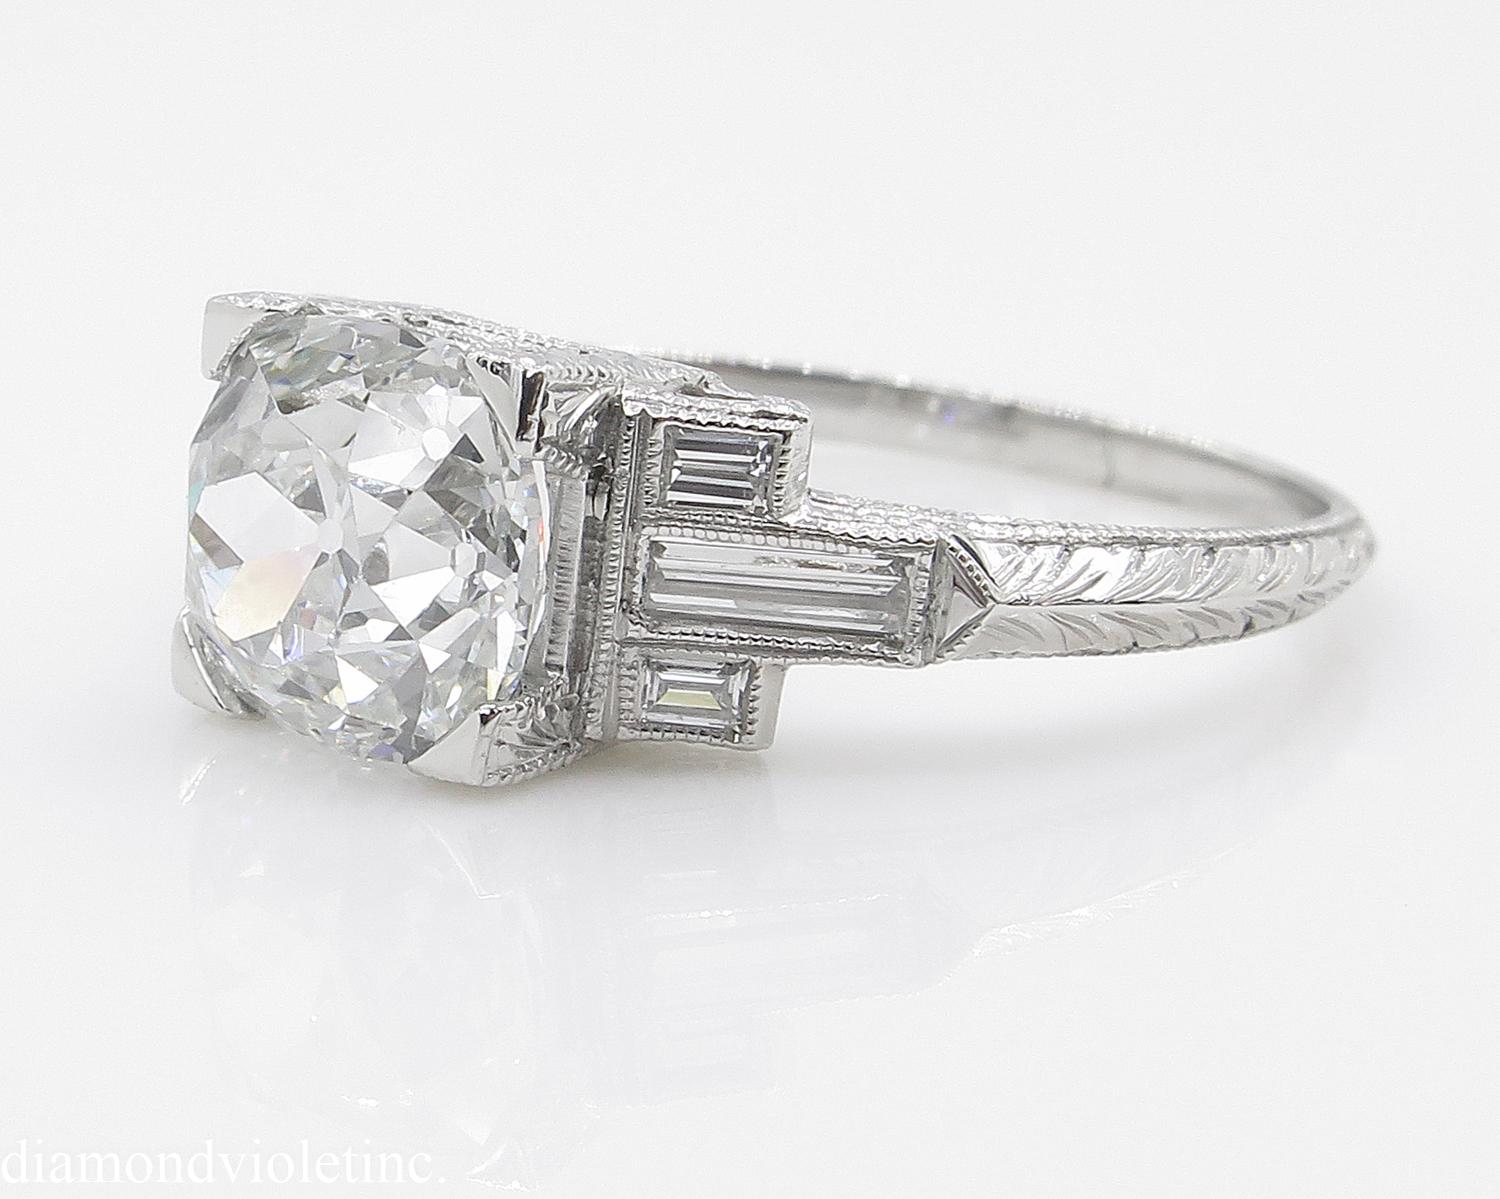 An Amazing Vintage Art Deco Handmade Platinum (stamped) Engagement ring dazzles with GIA Certified Sy 2 carats (1.95ct) Old Mine Cushion Center Diamond J color, SI1 clarity (Near COLORLESS and eye CLEAR), very Bright and Brilliant.
A one of a kind